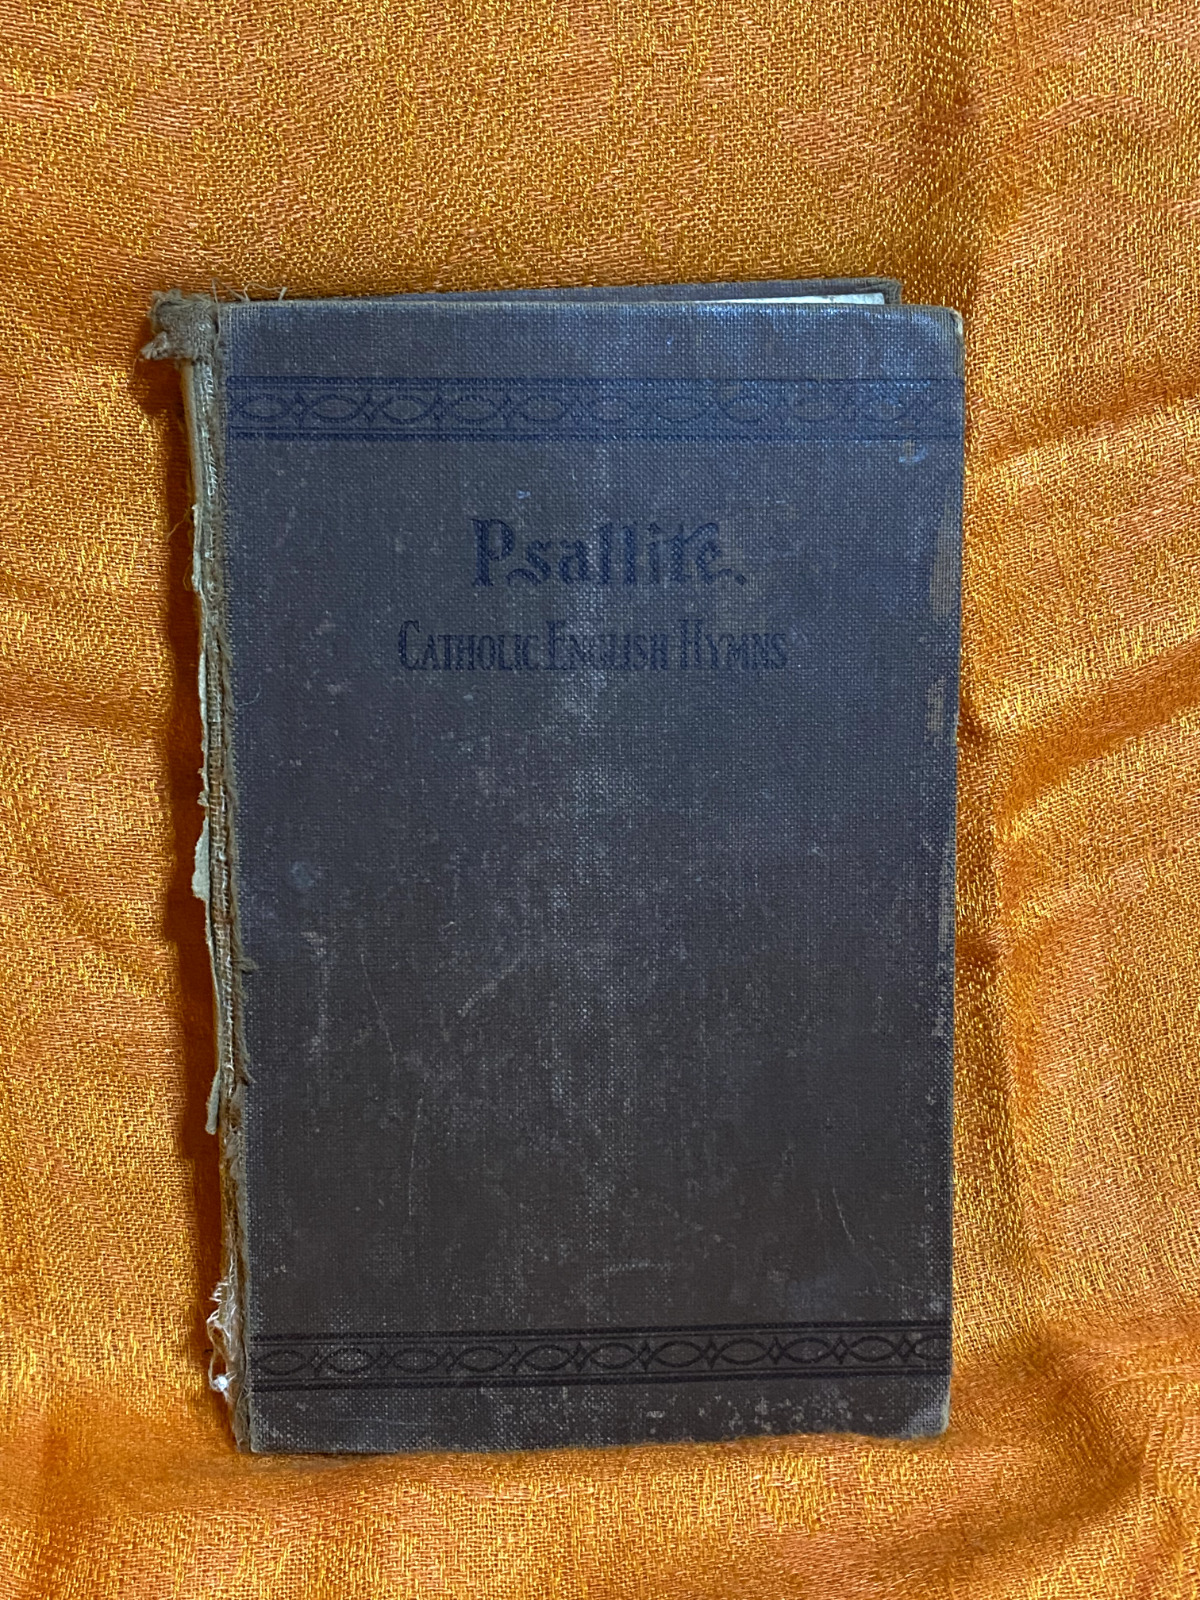 Vintage Psallite Catholic English Hymns With Prayers and Devotions 1940s Psalter